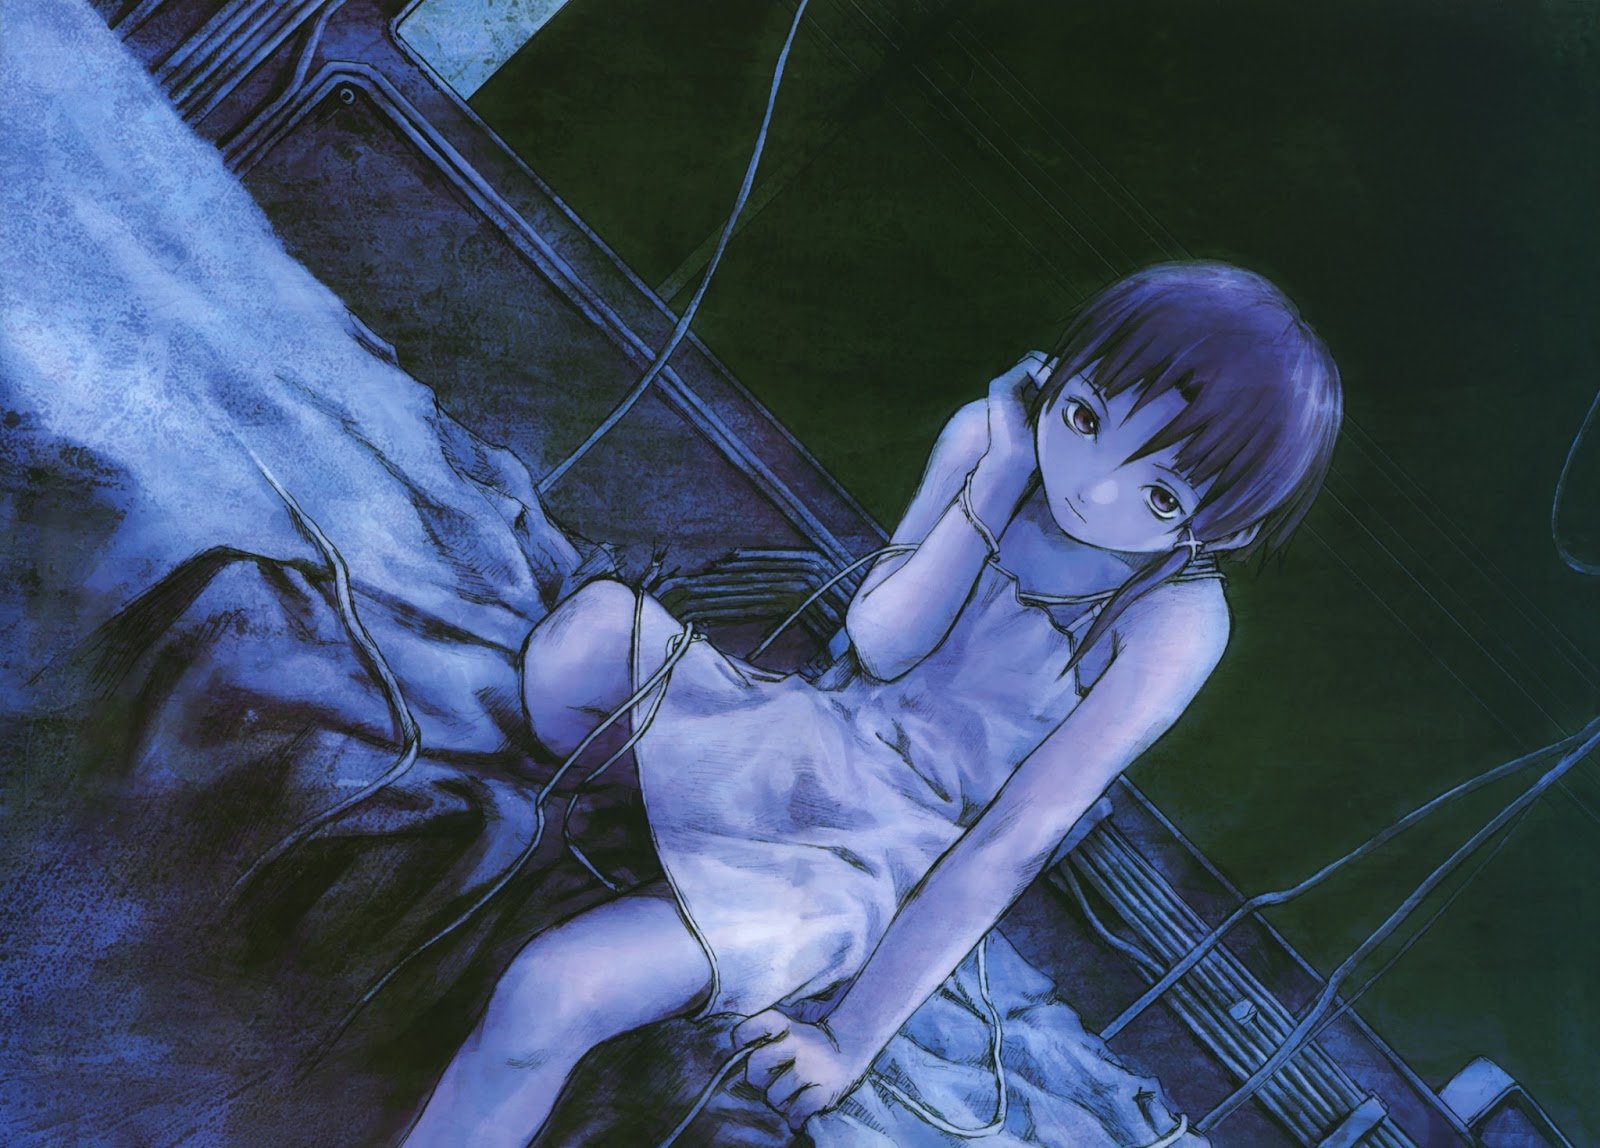 Serial Experiments Lain Anime Wallpaper